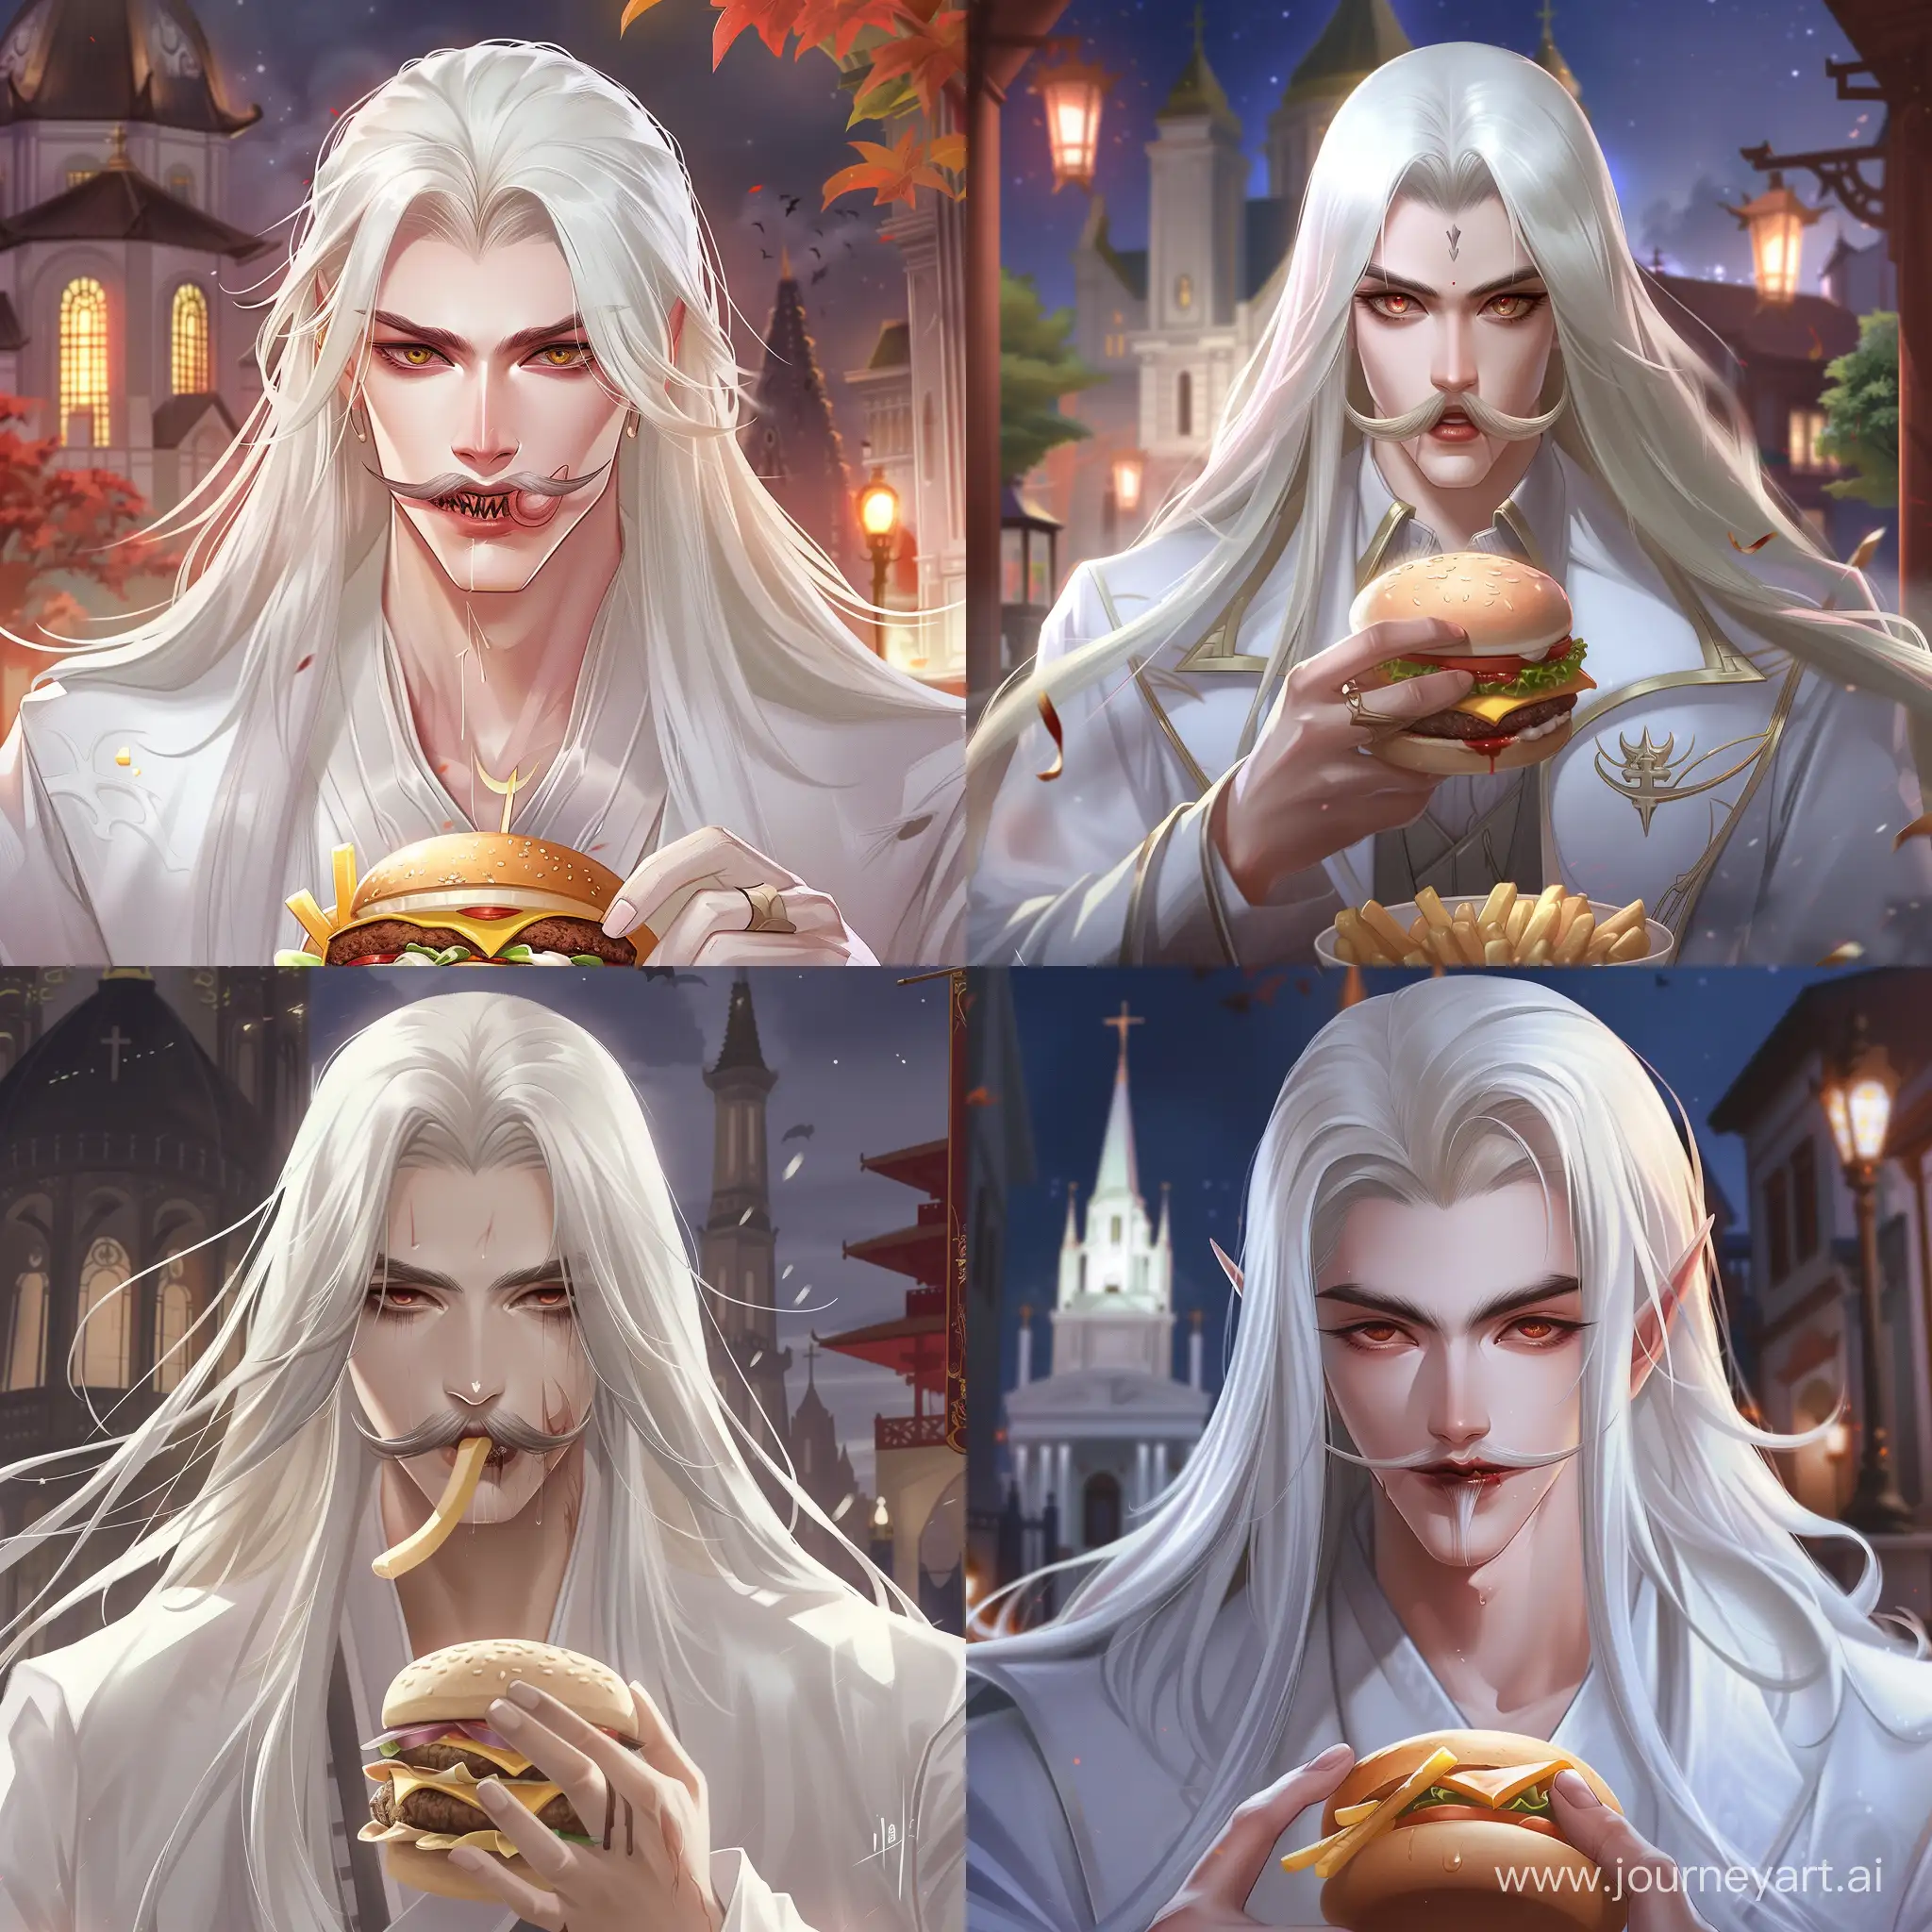 An elegant, but dangerous vampire lord. He has long, straight, white hair. In the artstyle of a chinese MMORPG. In the background is a church at night. He has a incredibly thick mustache, but still a cute face. His face has very soft East-Asian features. His clothing is completely white. He has a crazy expression, almost psychotic. His eyes are wide open. He is eating a cheeseburger with fries in a fast food chain. He is kinda a messy eater.